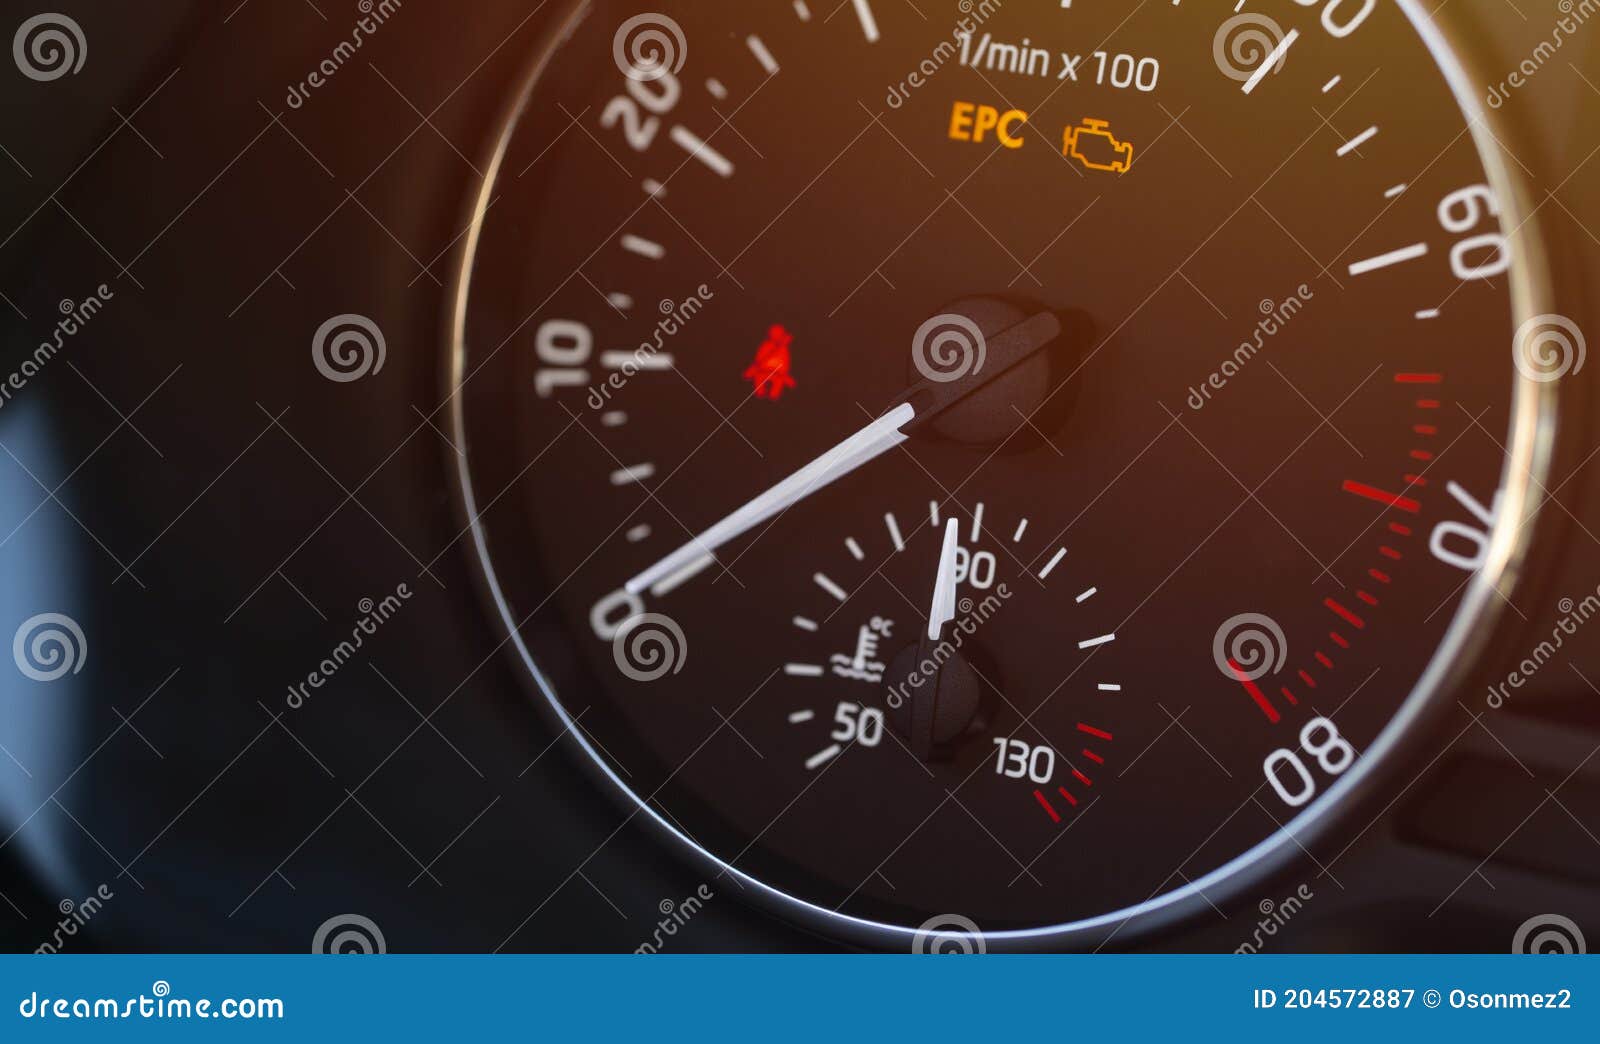 temperature, engine revolutions and warning lights on the vehicle display